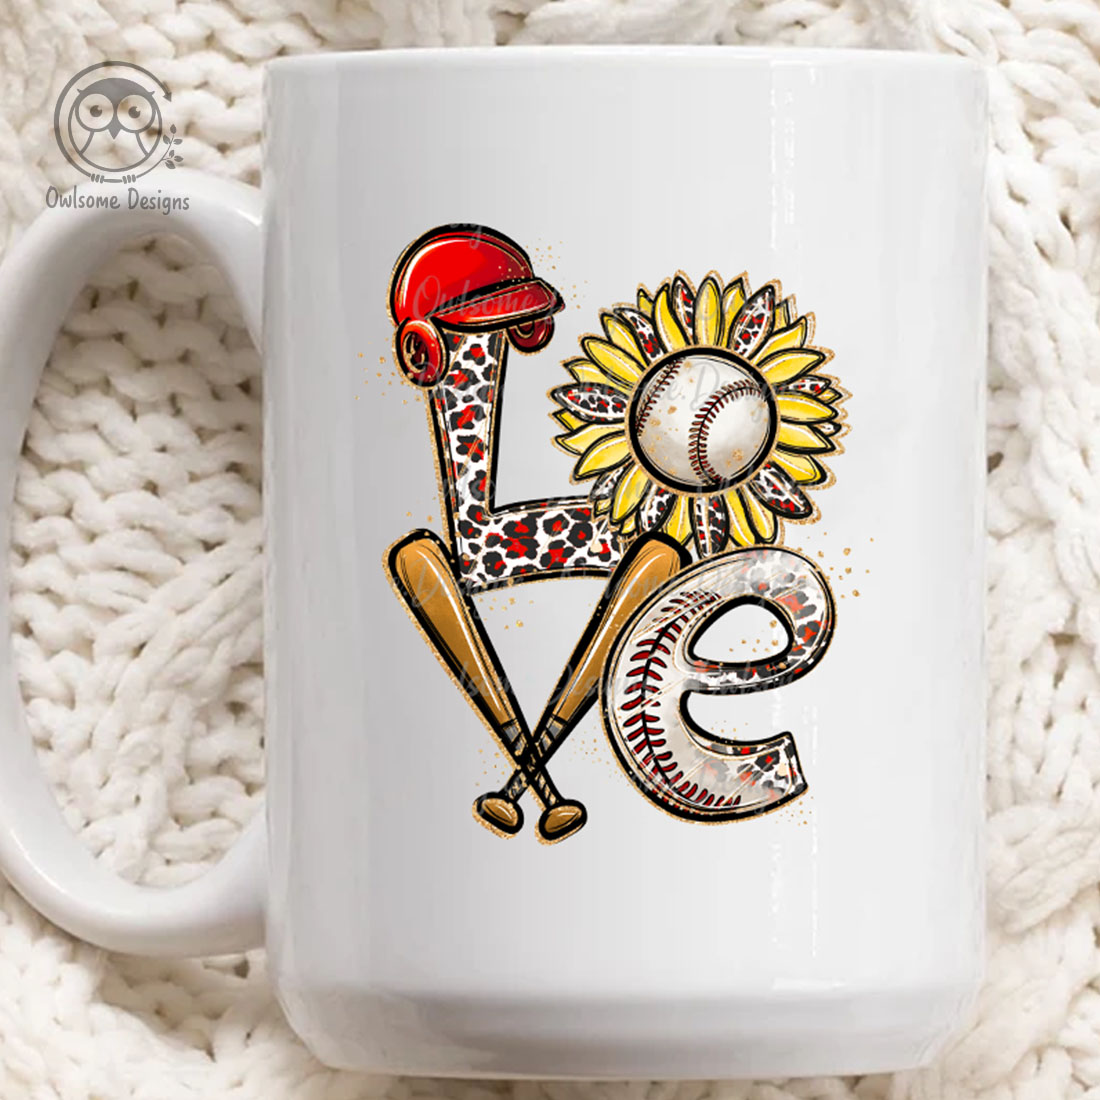 Image of a white cup with a charming inscription Love with baseball elements.